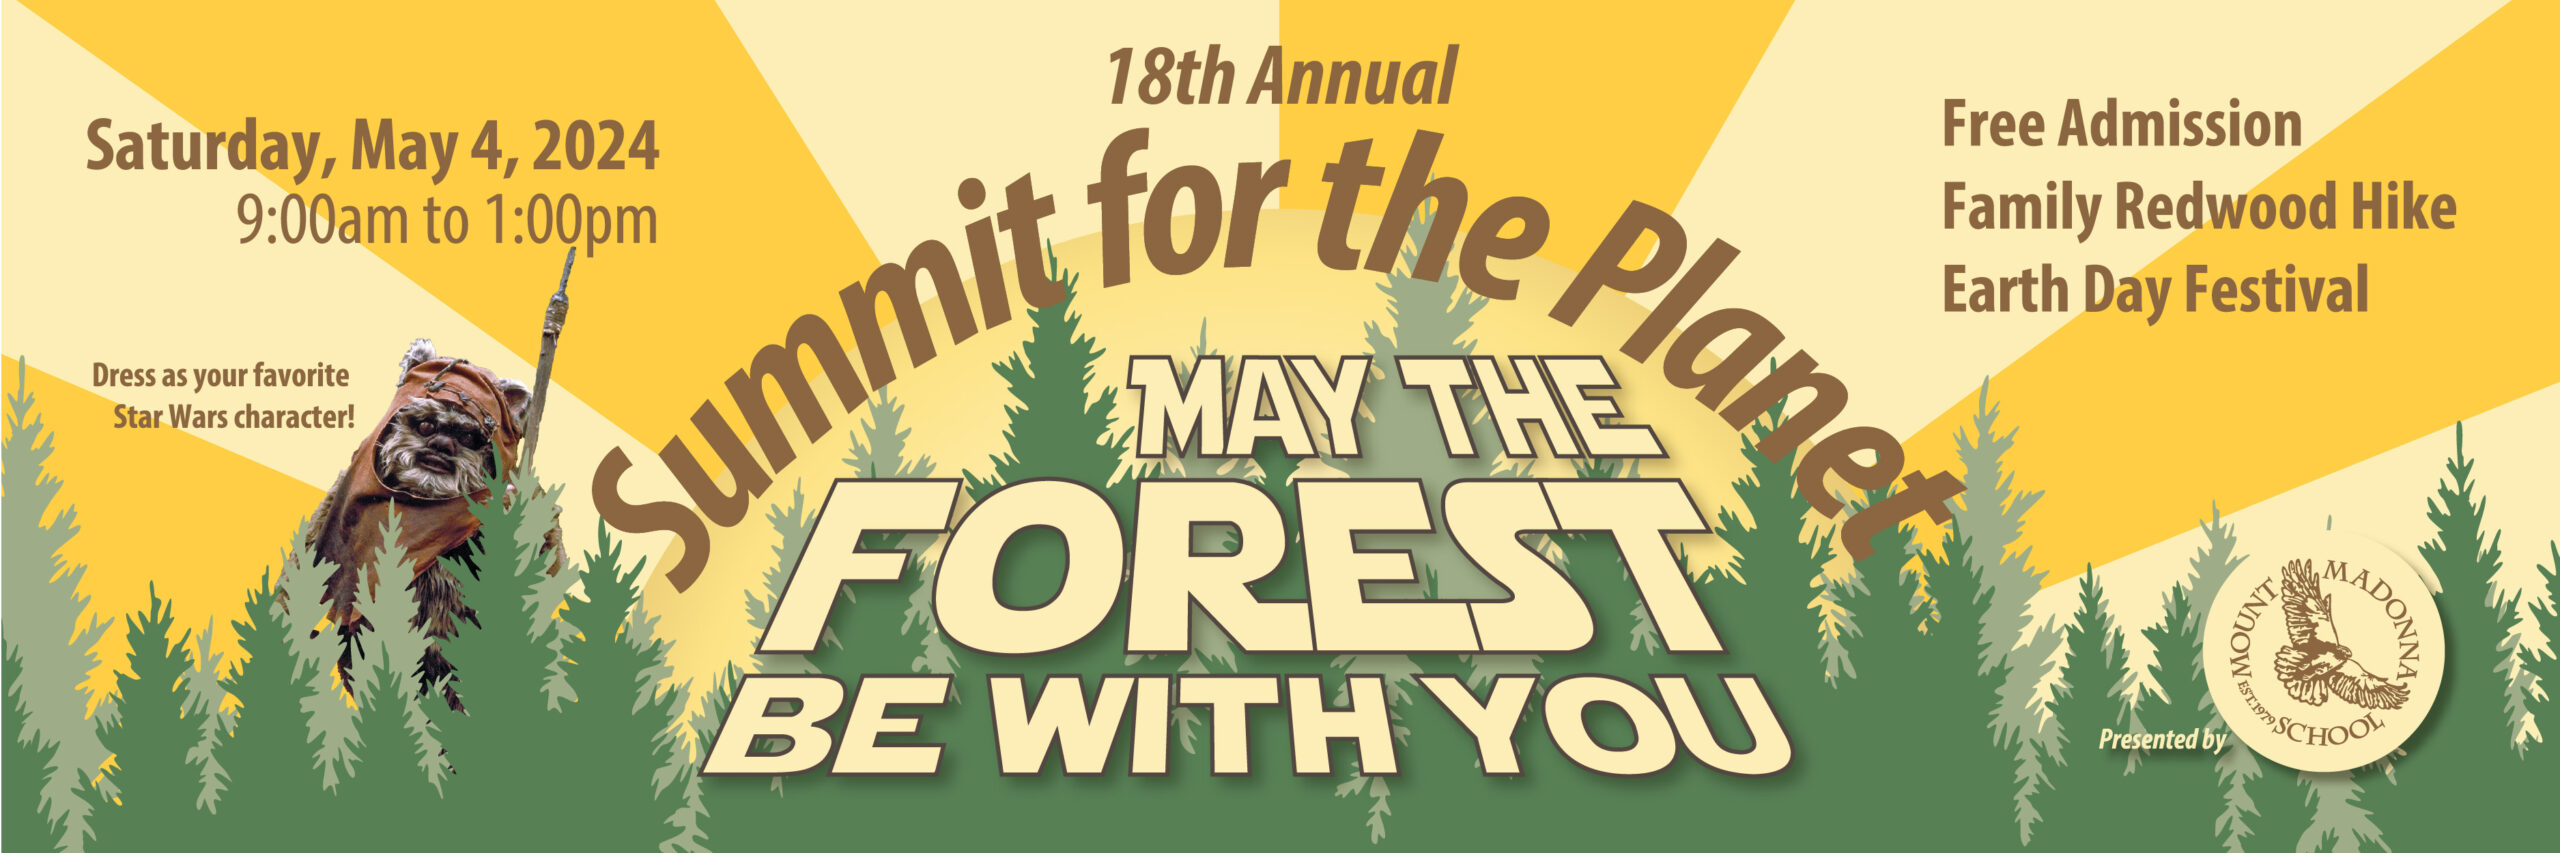 18th annual Summit for the Planet - May the Forest be with you -- May 4, 2024